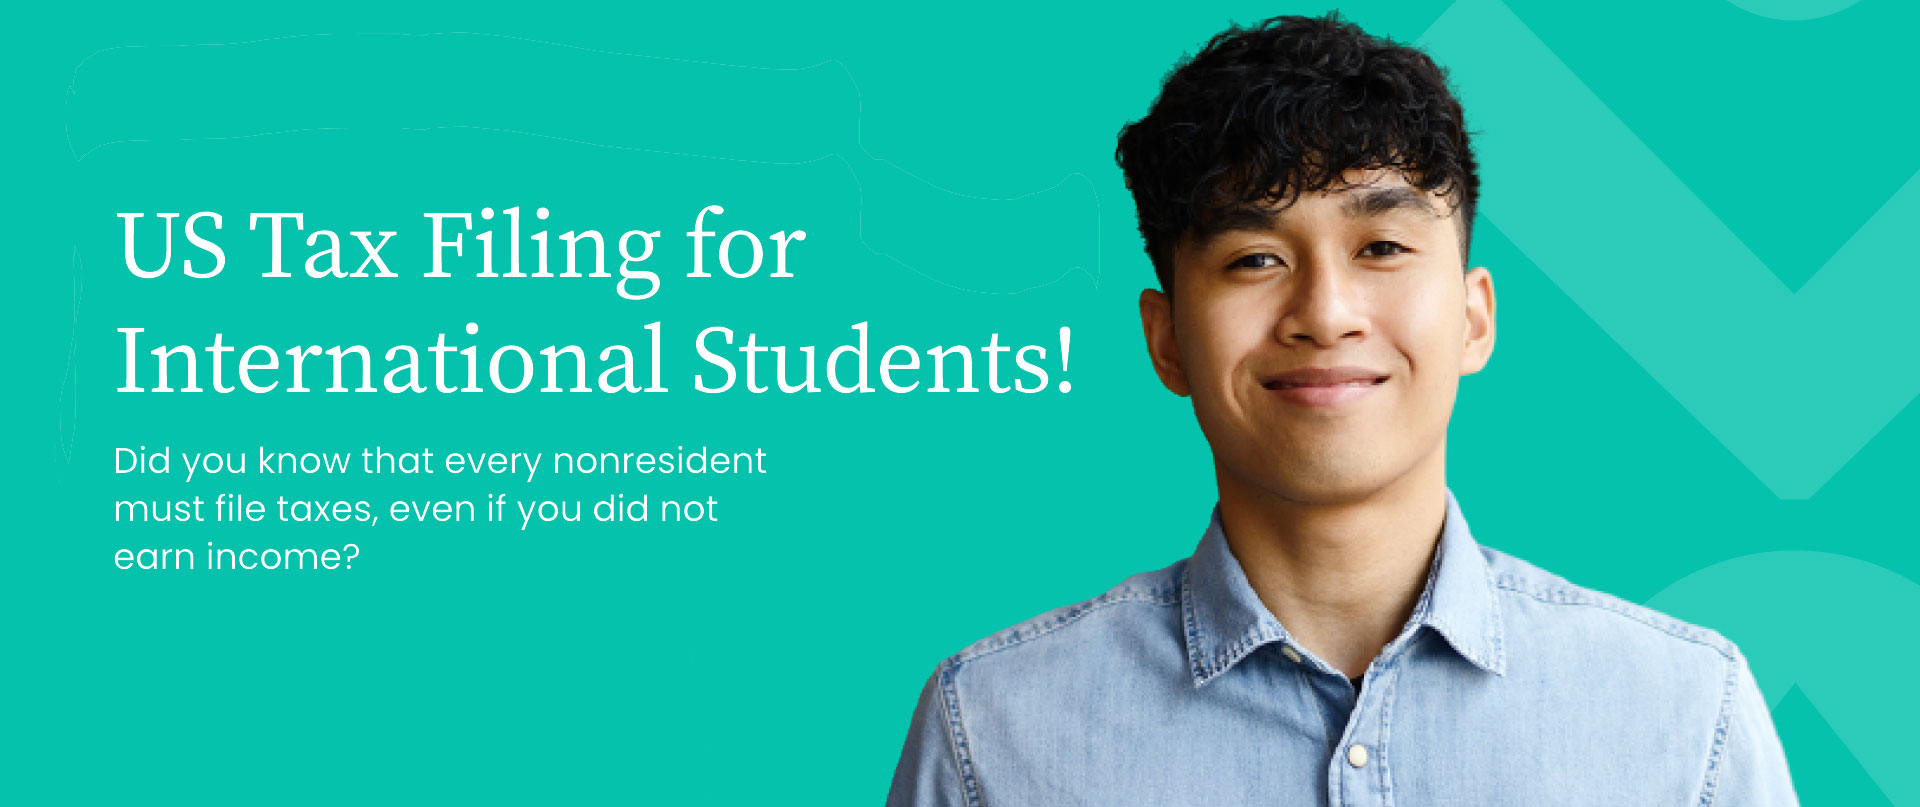 Tax assistance for international students